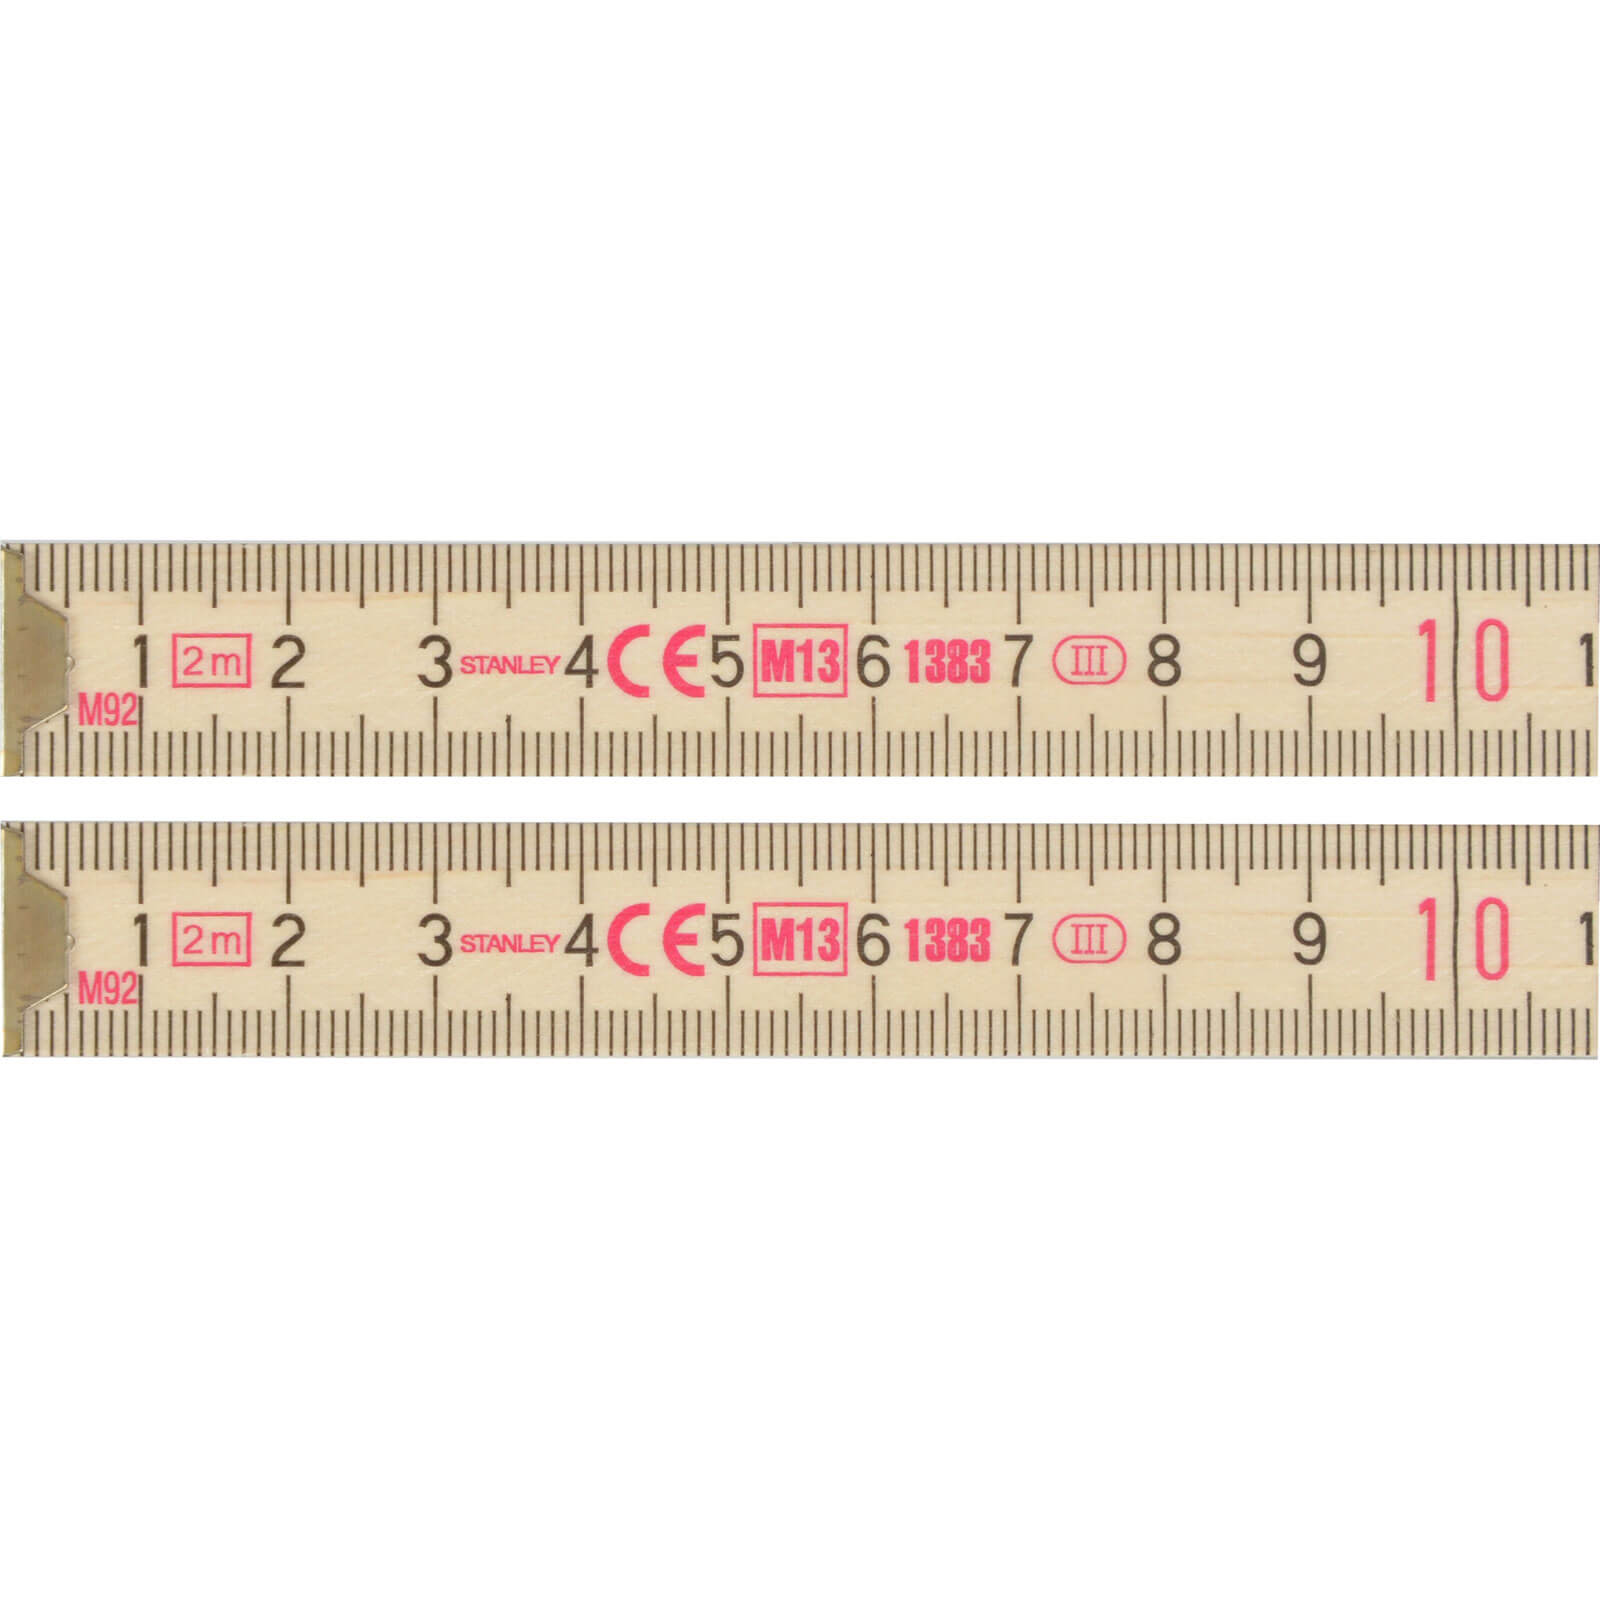 Photos - Tape Measure and Surveyor Tape Stanley Wooden Folding Rule 2m 